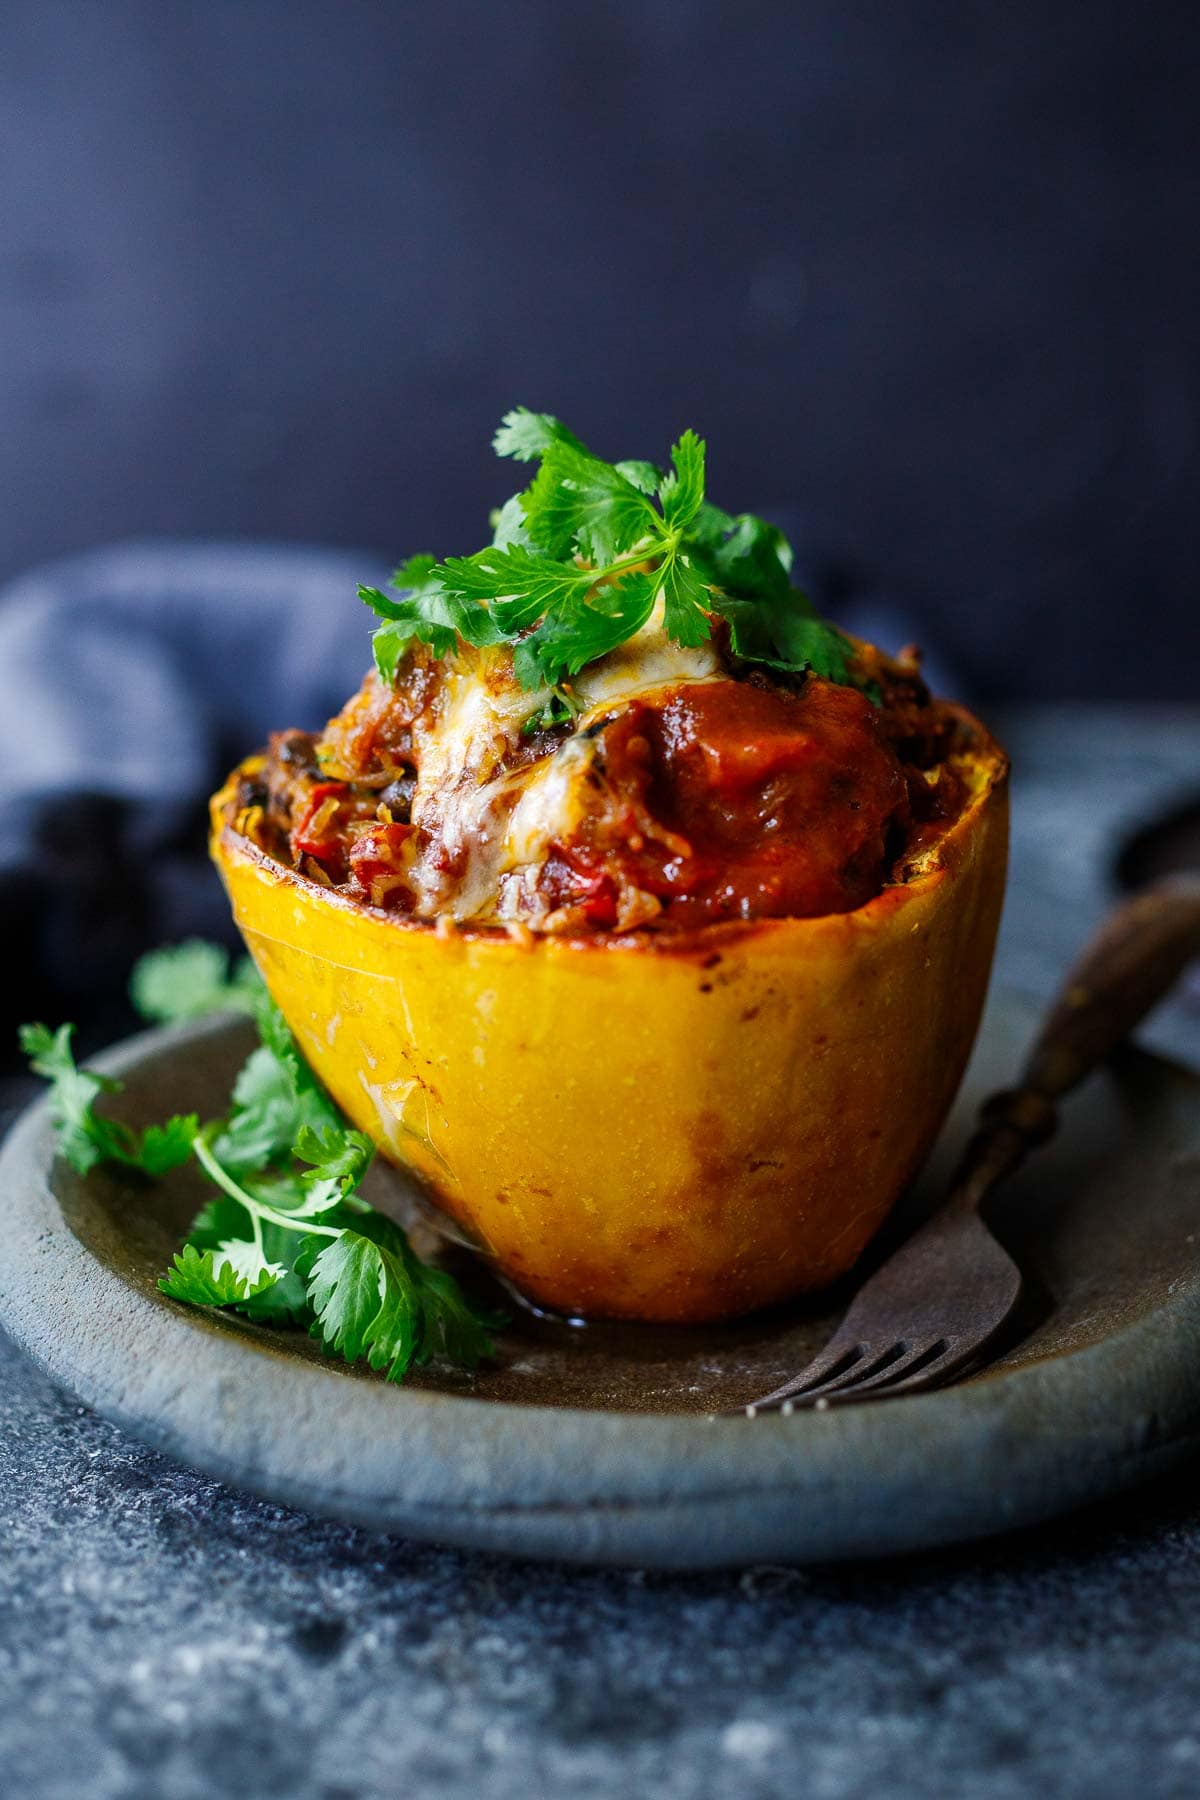 A delicious vegetarian recipe for Stuffed Spaghetti Squash with a Mexican twist. Black beans, corn, bell pepper, onion and cilantro, enchilada sauce and melty cheese give this spaghetti squash recipe the best flavor. Low-carb and vegan-adaptable!